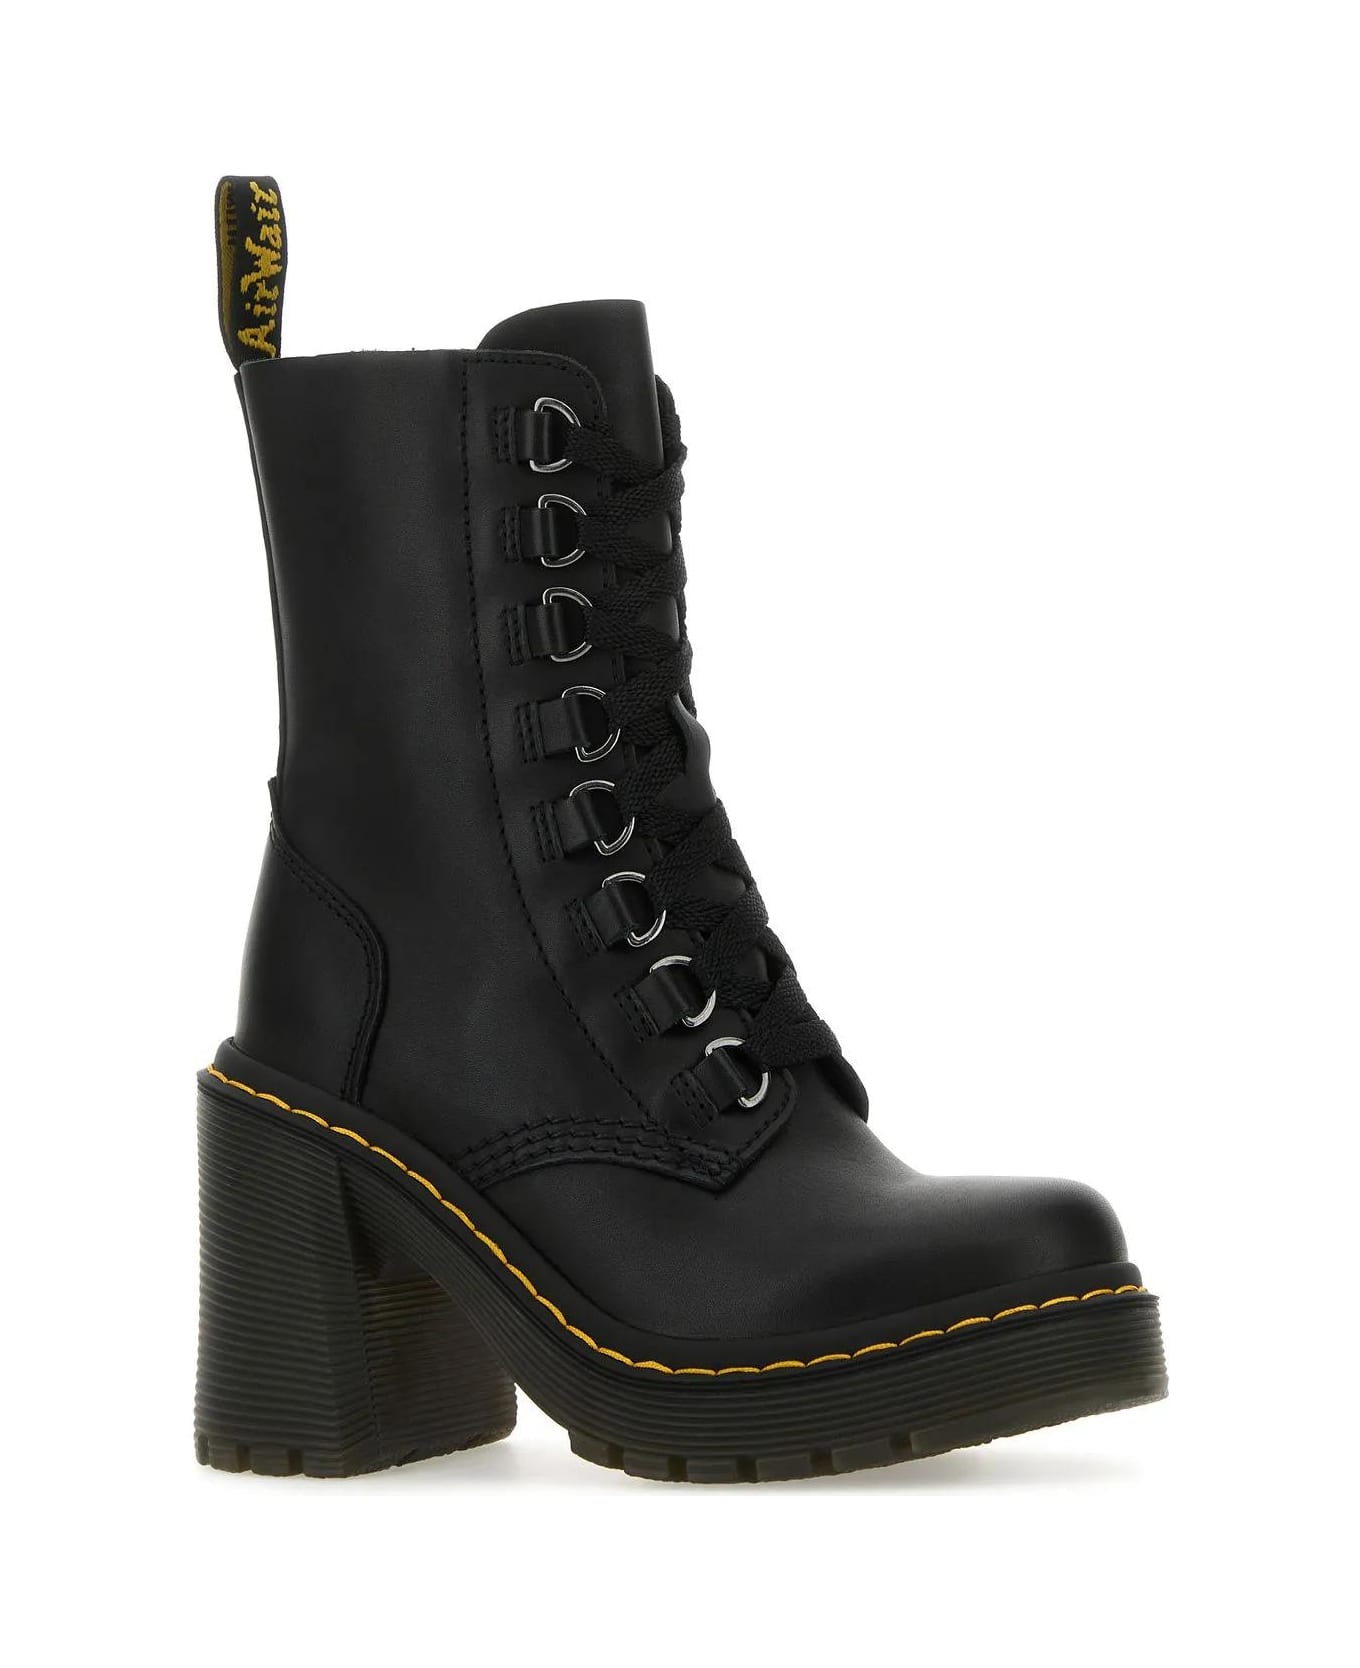 Dr. Martens Chesney Ankle Boots